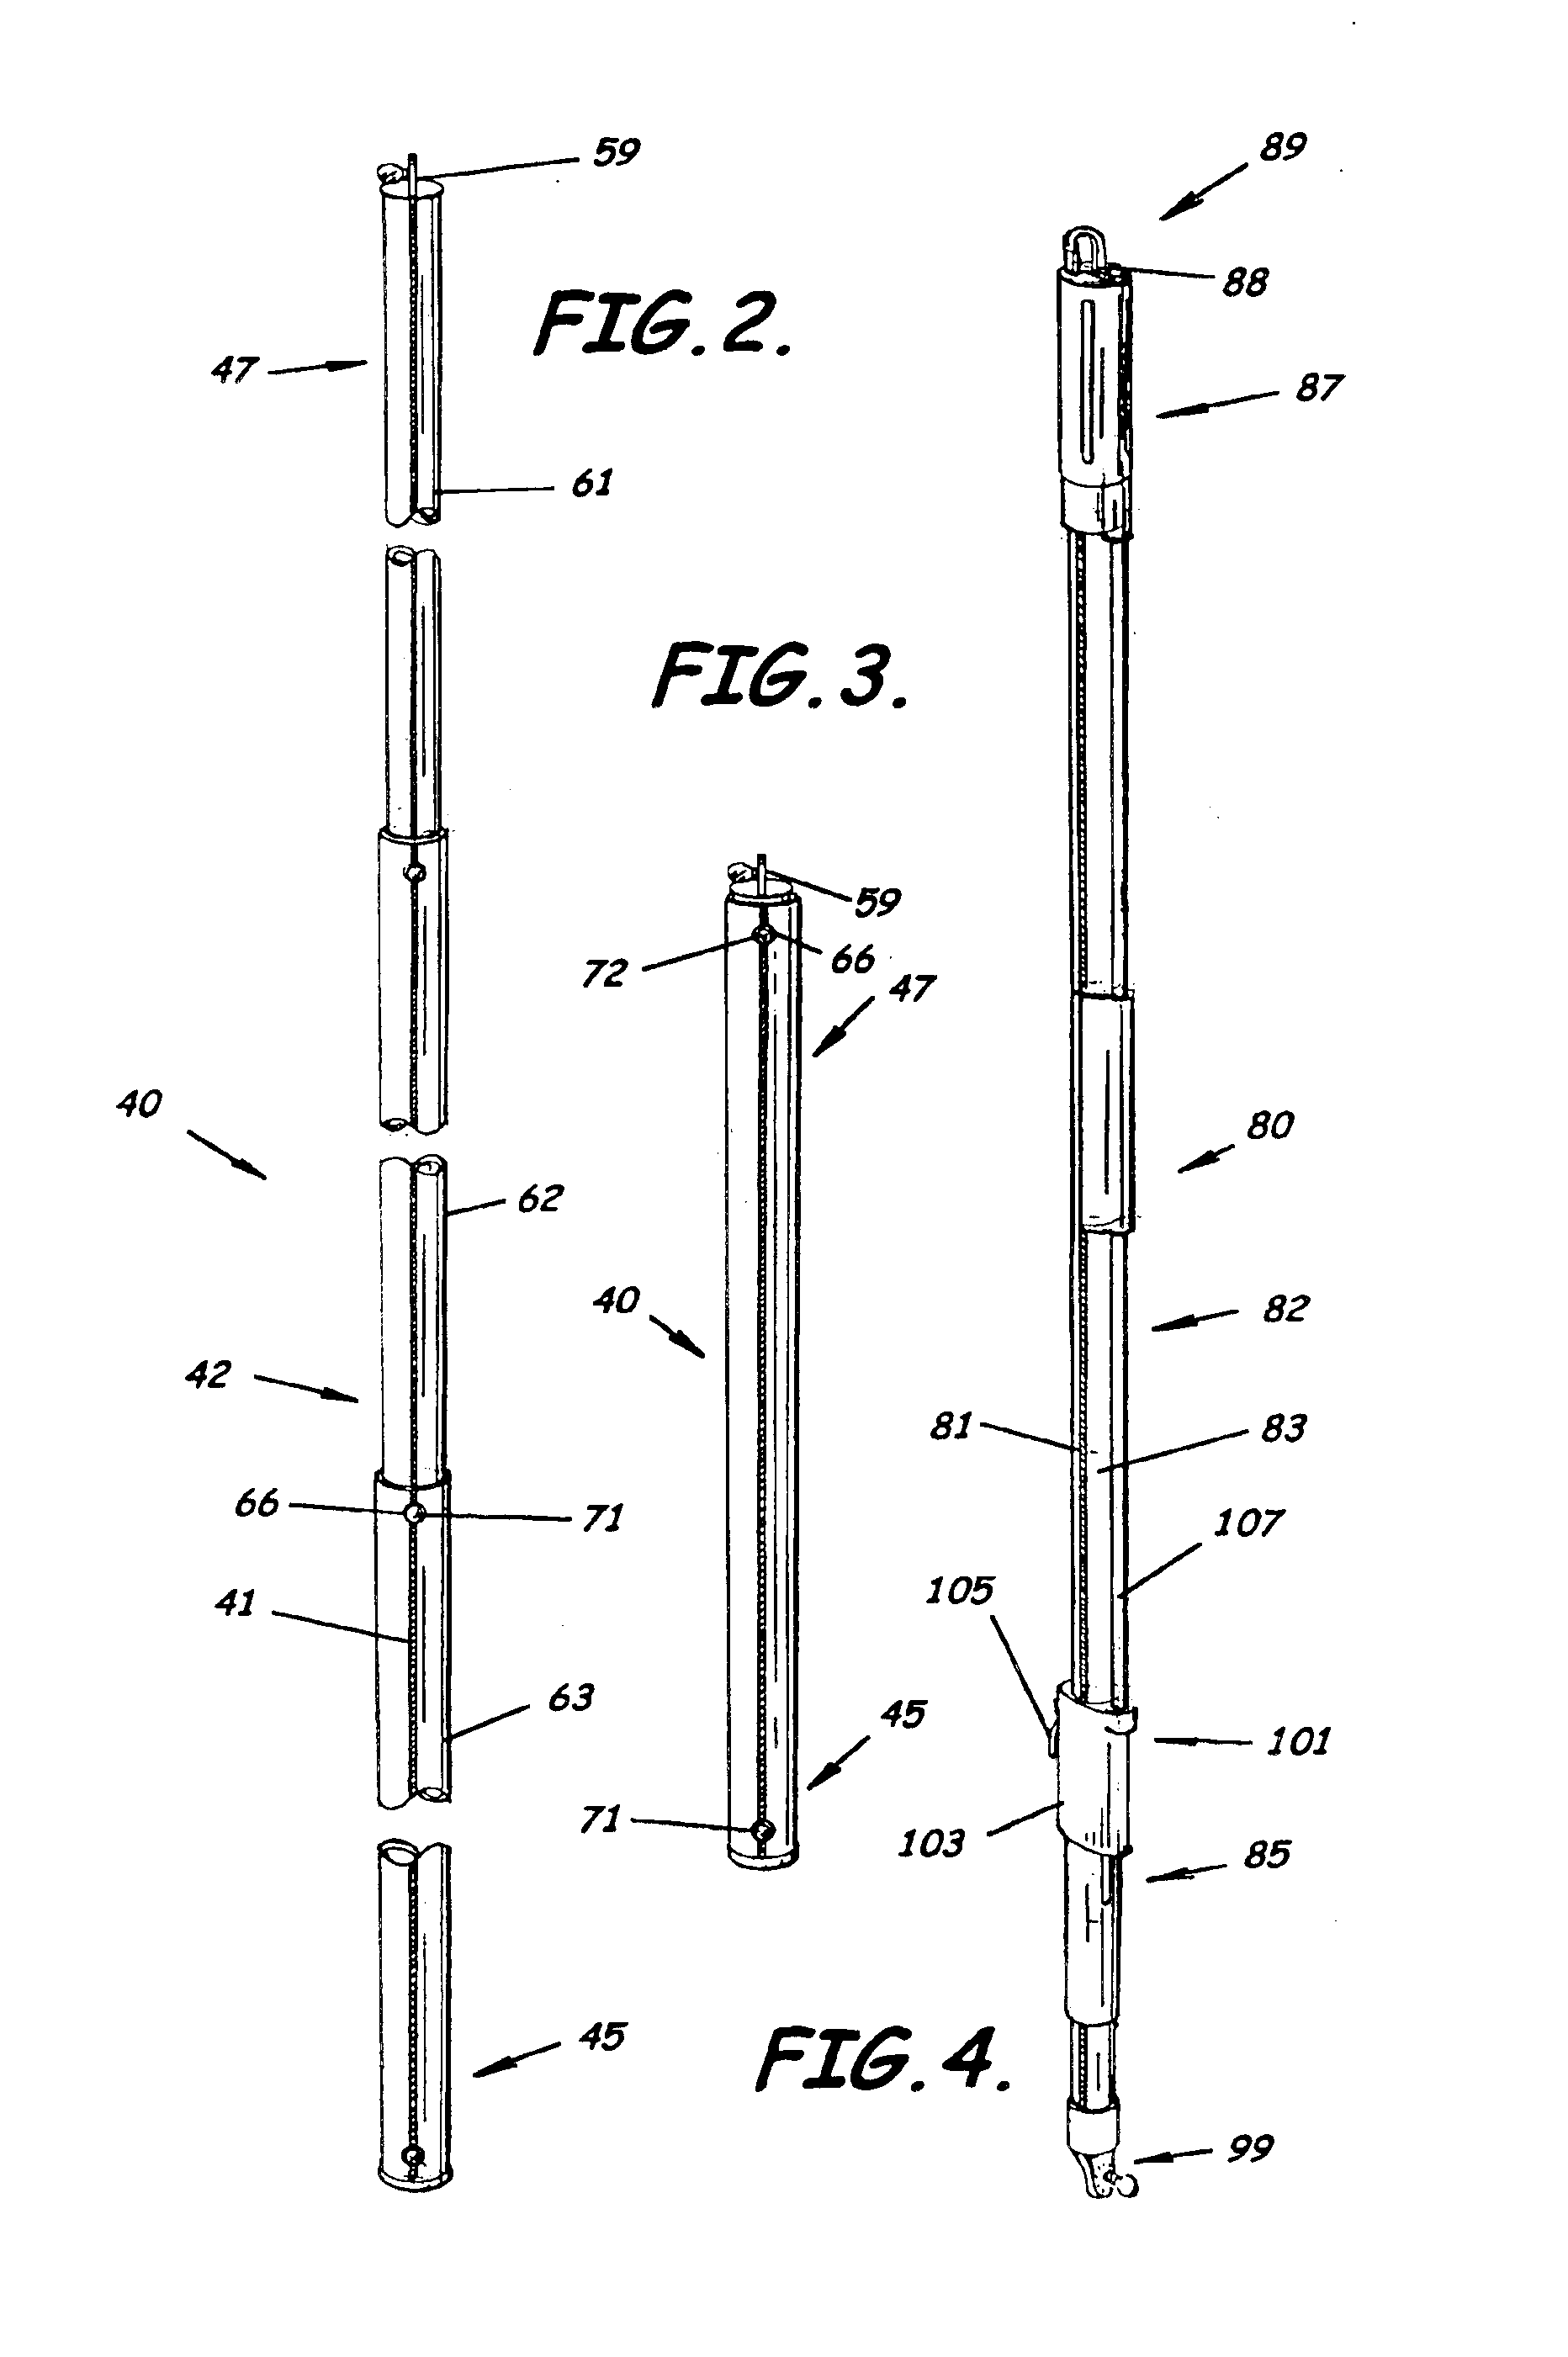 Utility line pole having alignment indicator and associated methods